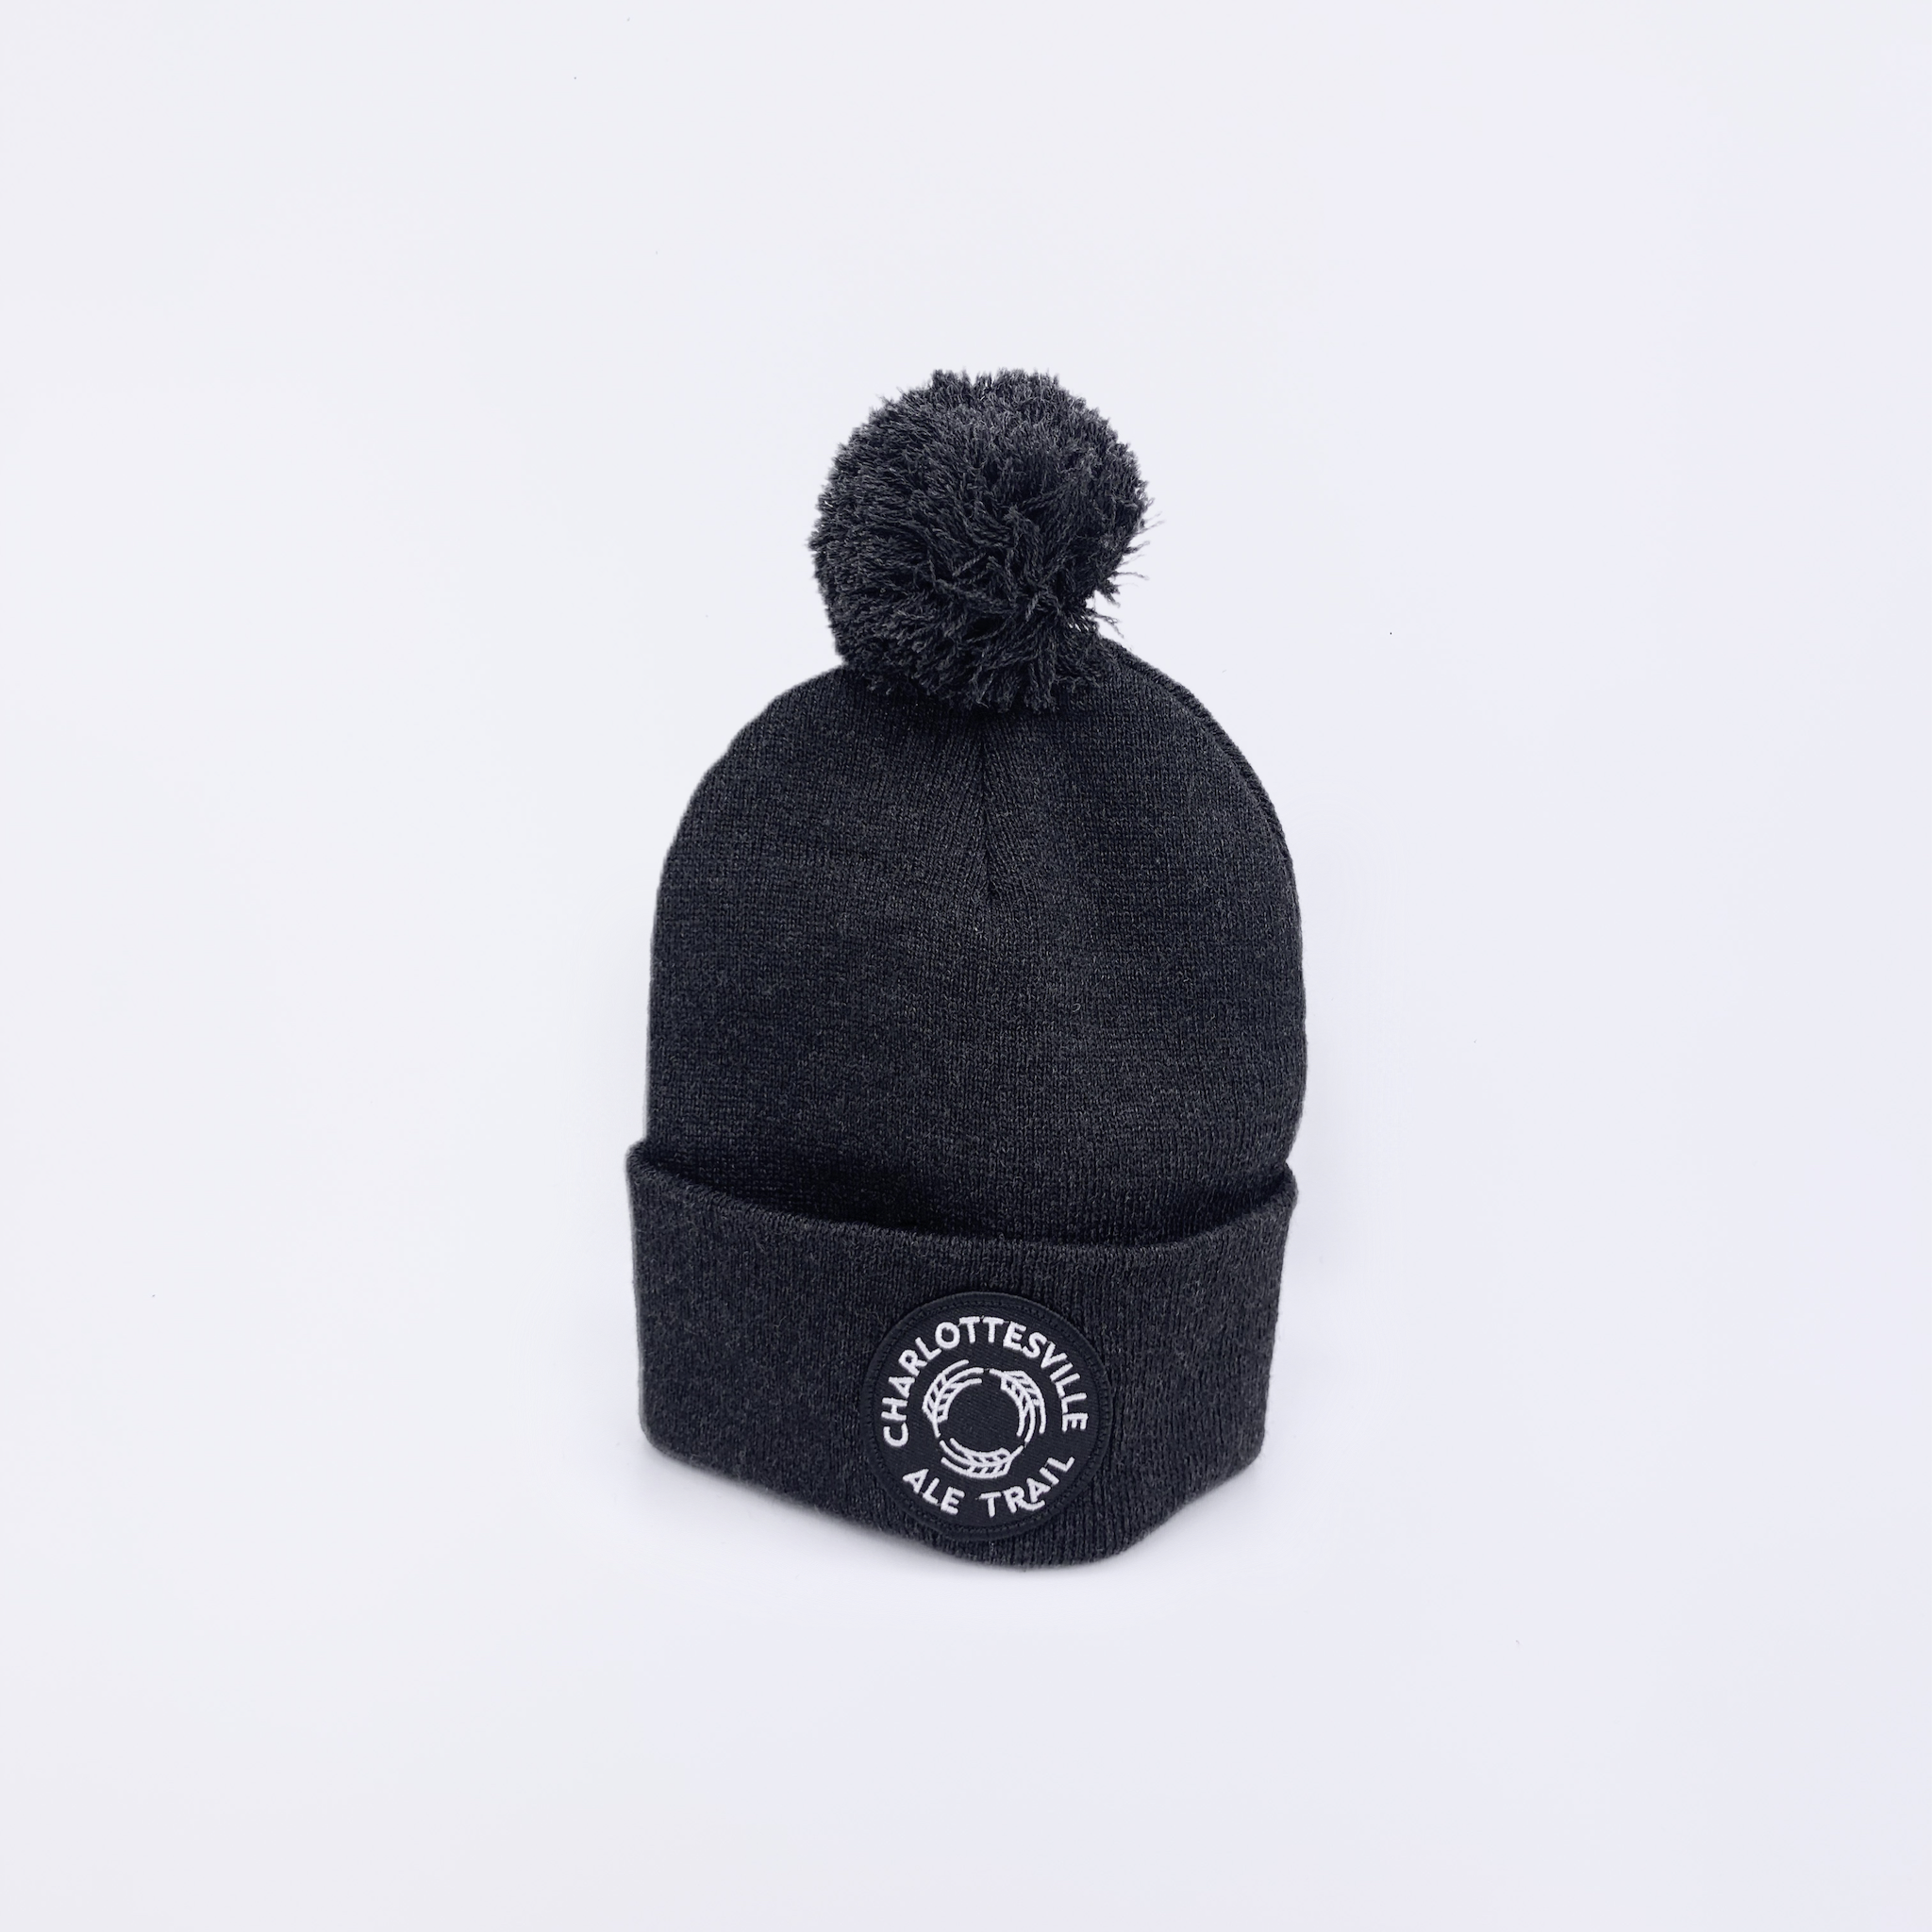 Buy Pom Pom Beanie by Le Bent online - Le Bent USA